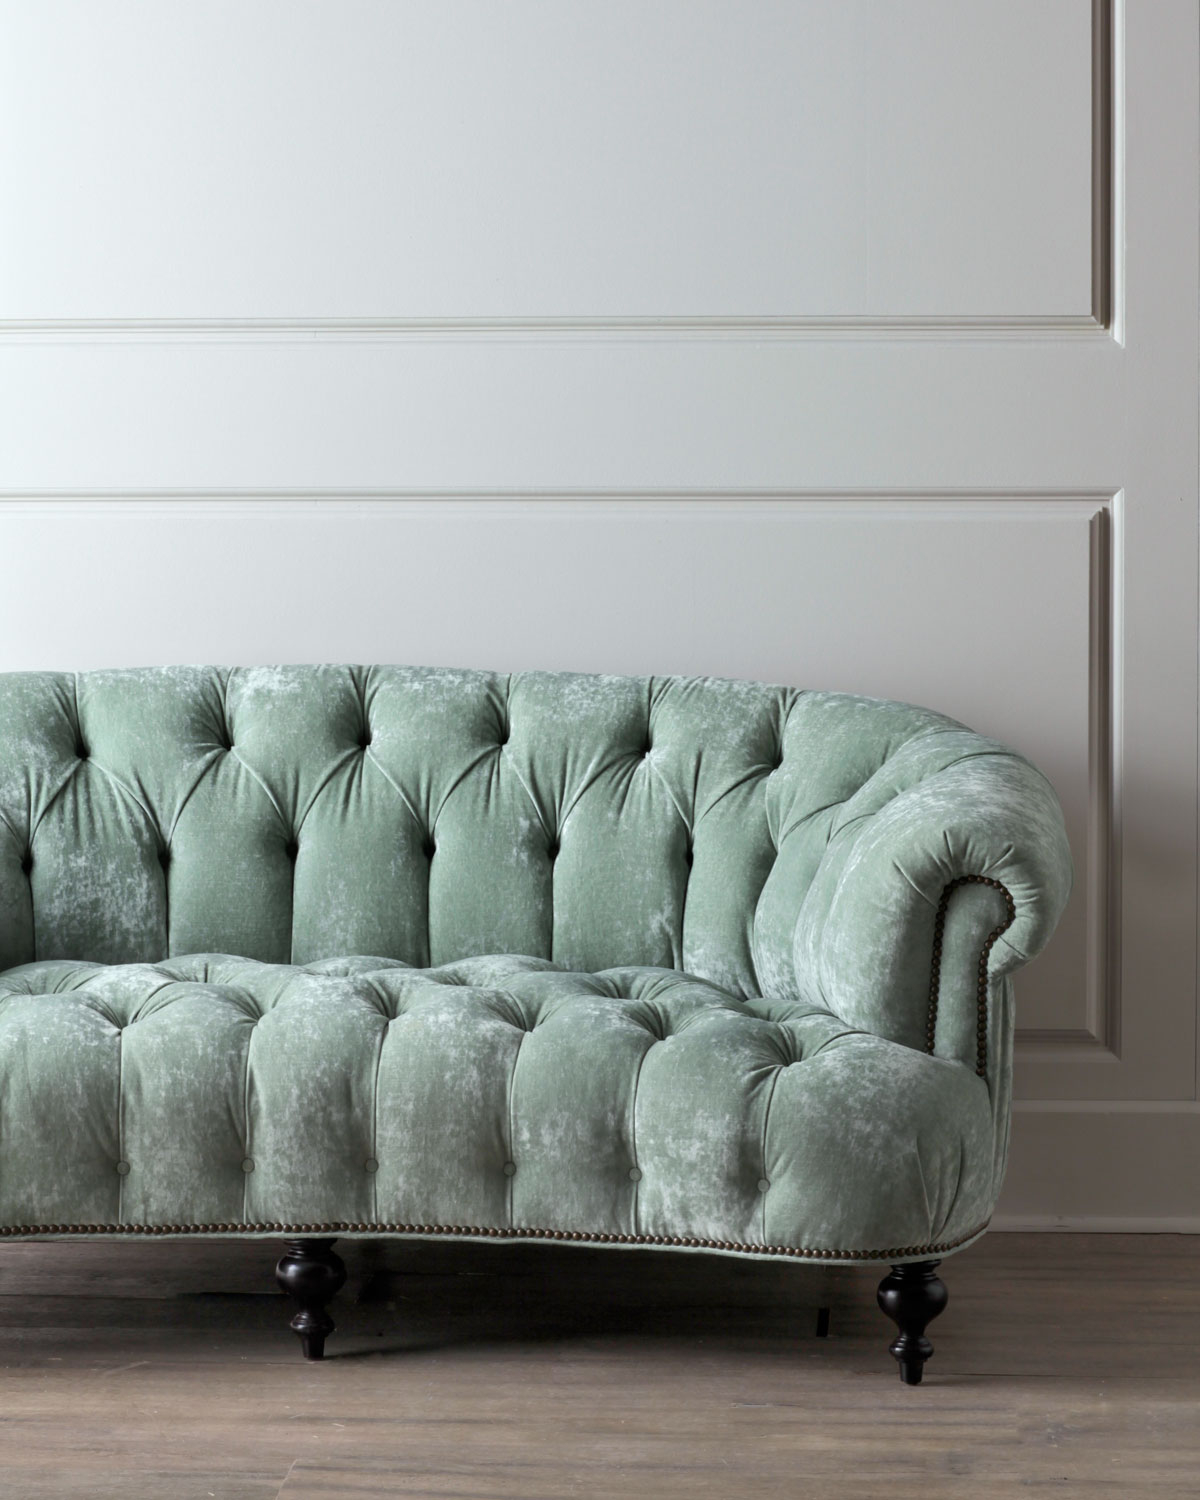 Teal couch